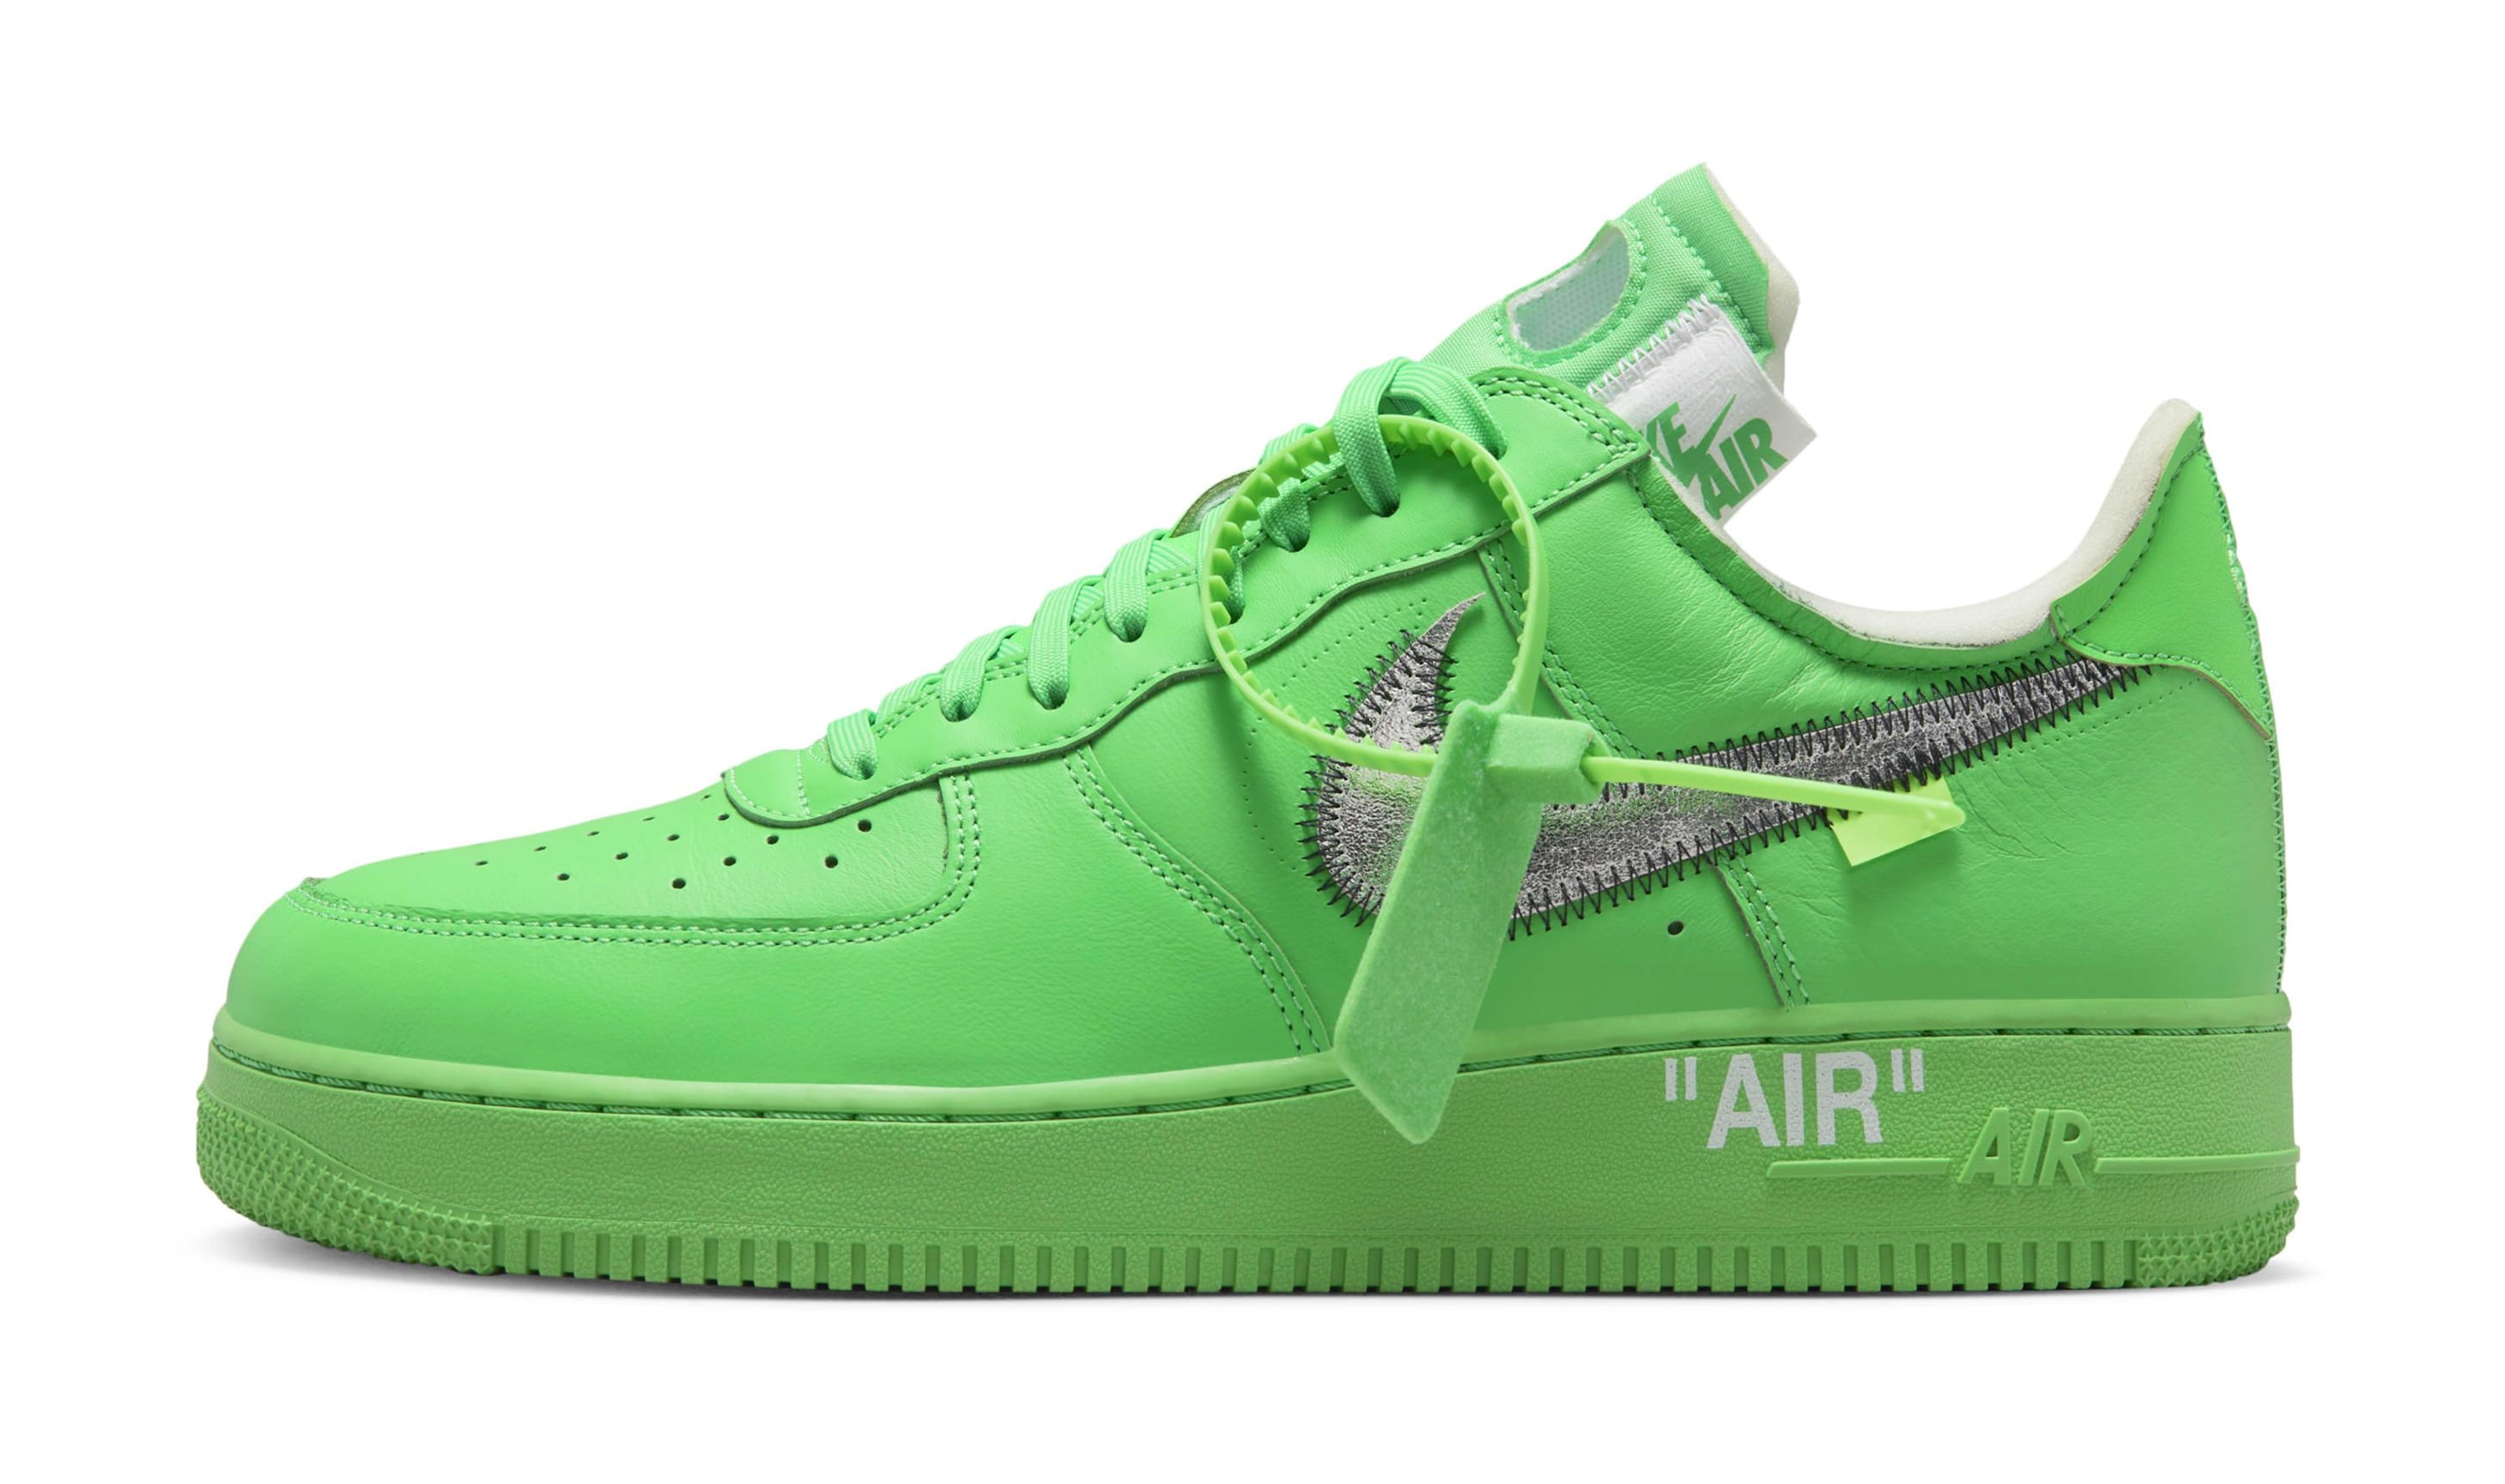 mature fund hurt Off-White x Nike Air Force 1 Low 'Green Spark' DX1419-300 Release Date |  Sole Collector